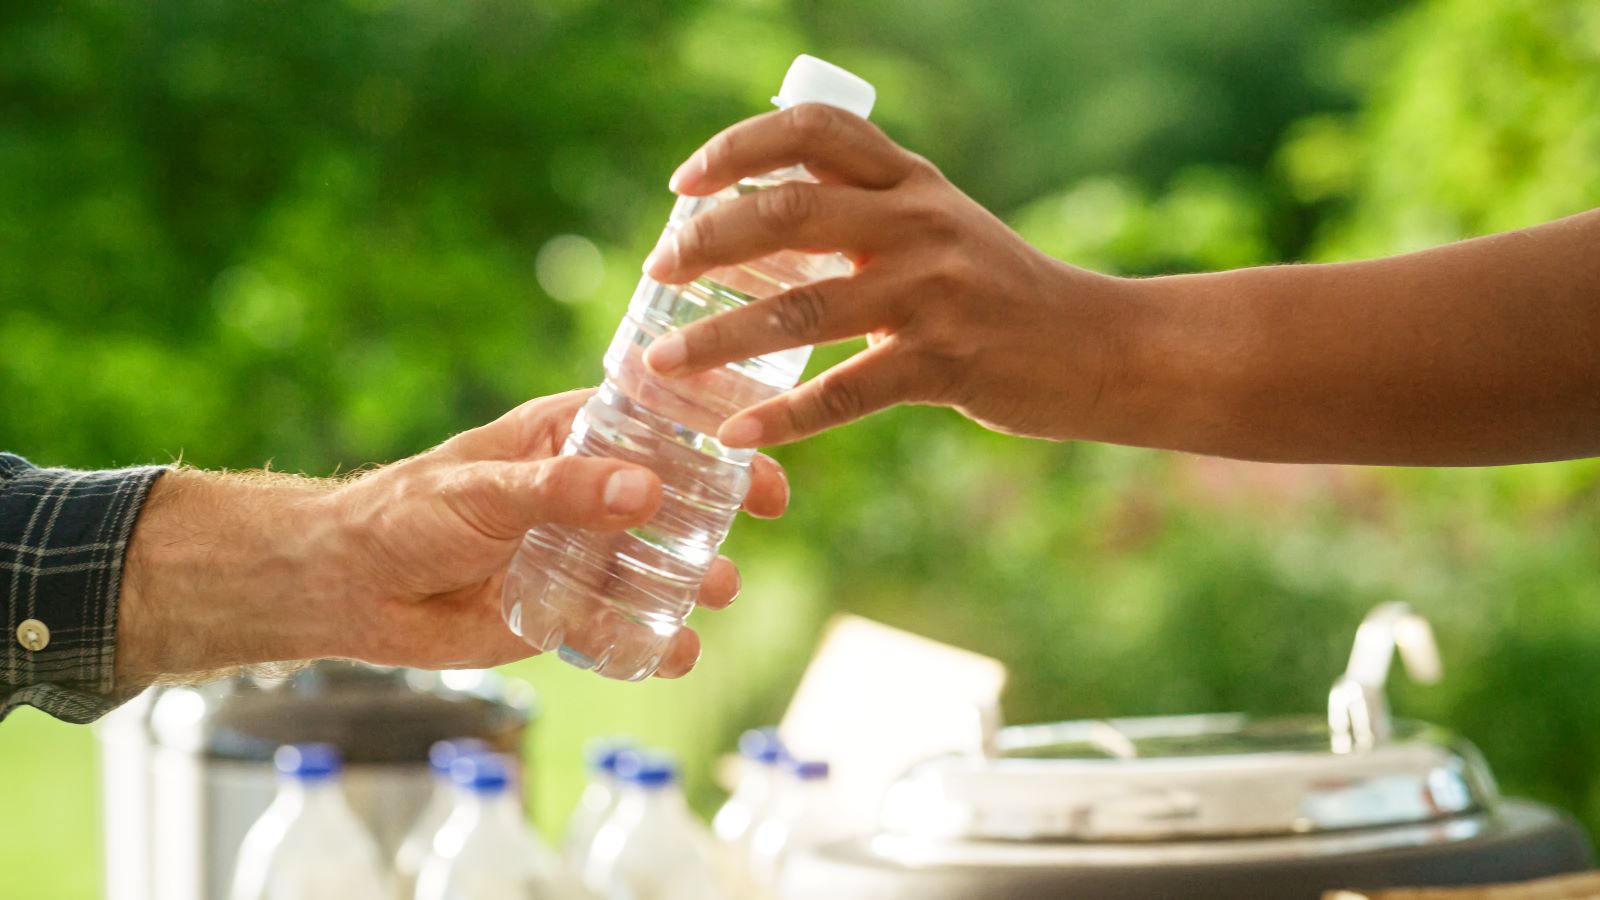 If You Drink Out of Plastic Water Bottles, Don't Make This Mistake